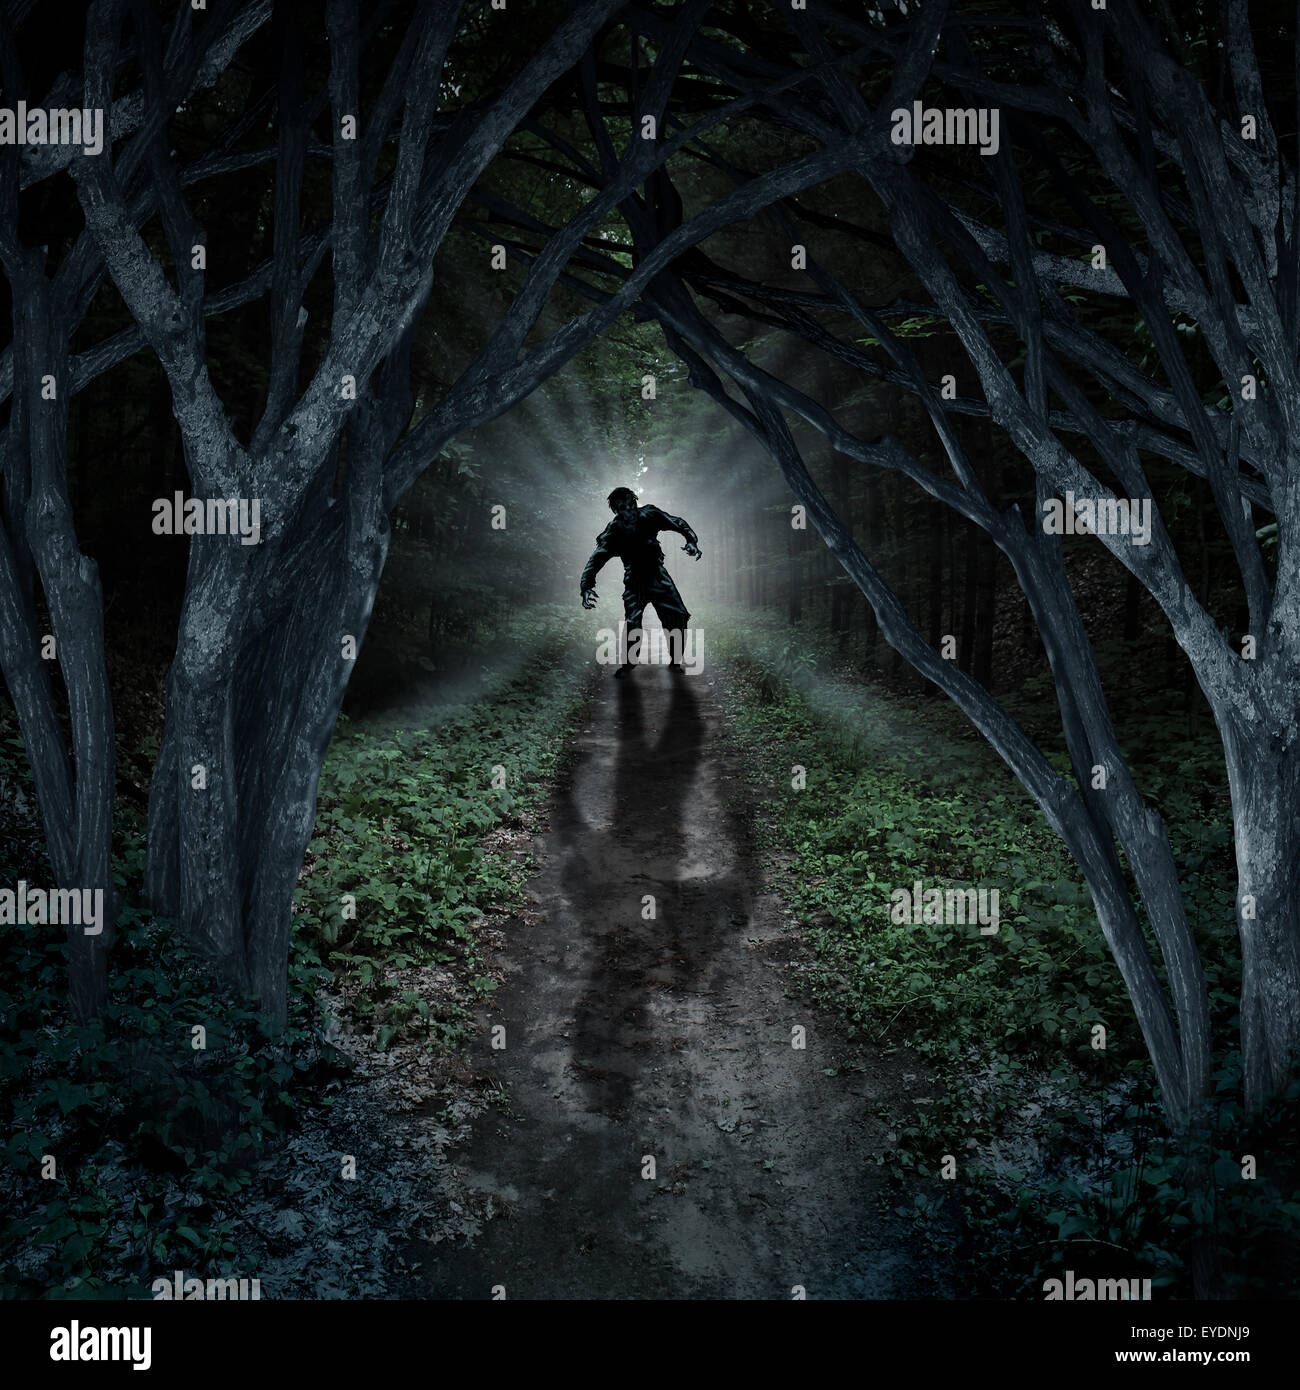 Horror monster walking in a dark forest as a scary fantasy concept with a creepy thing coming out of a remote wilderness background with a moon glow behind it as a halloween fear symbol of haunted woods and panic anxiety. Stock Photo